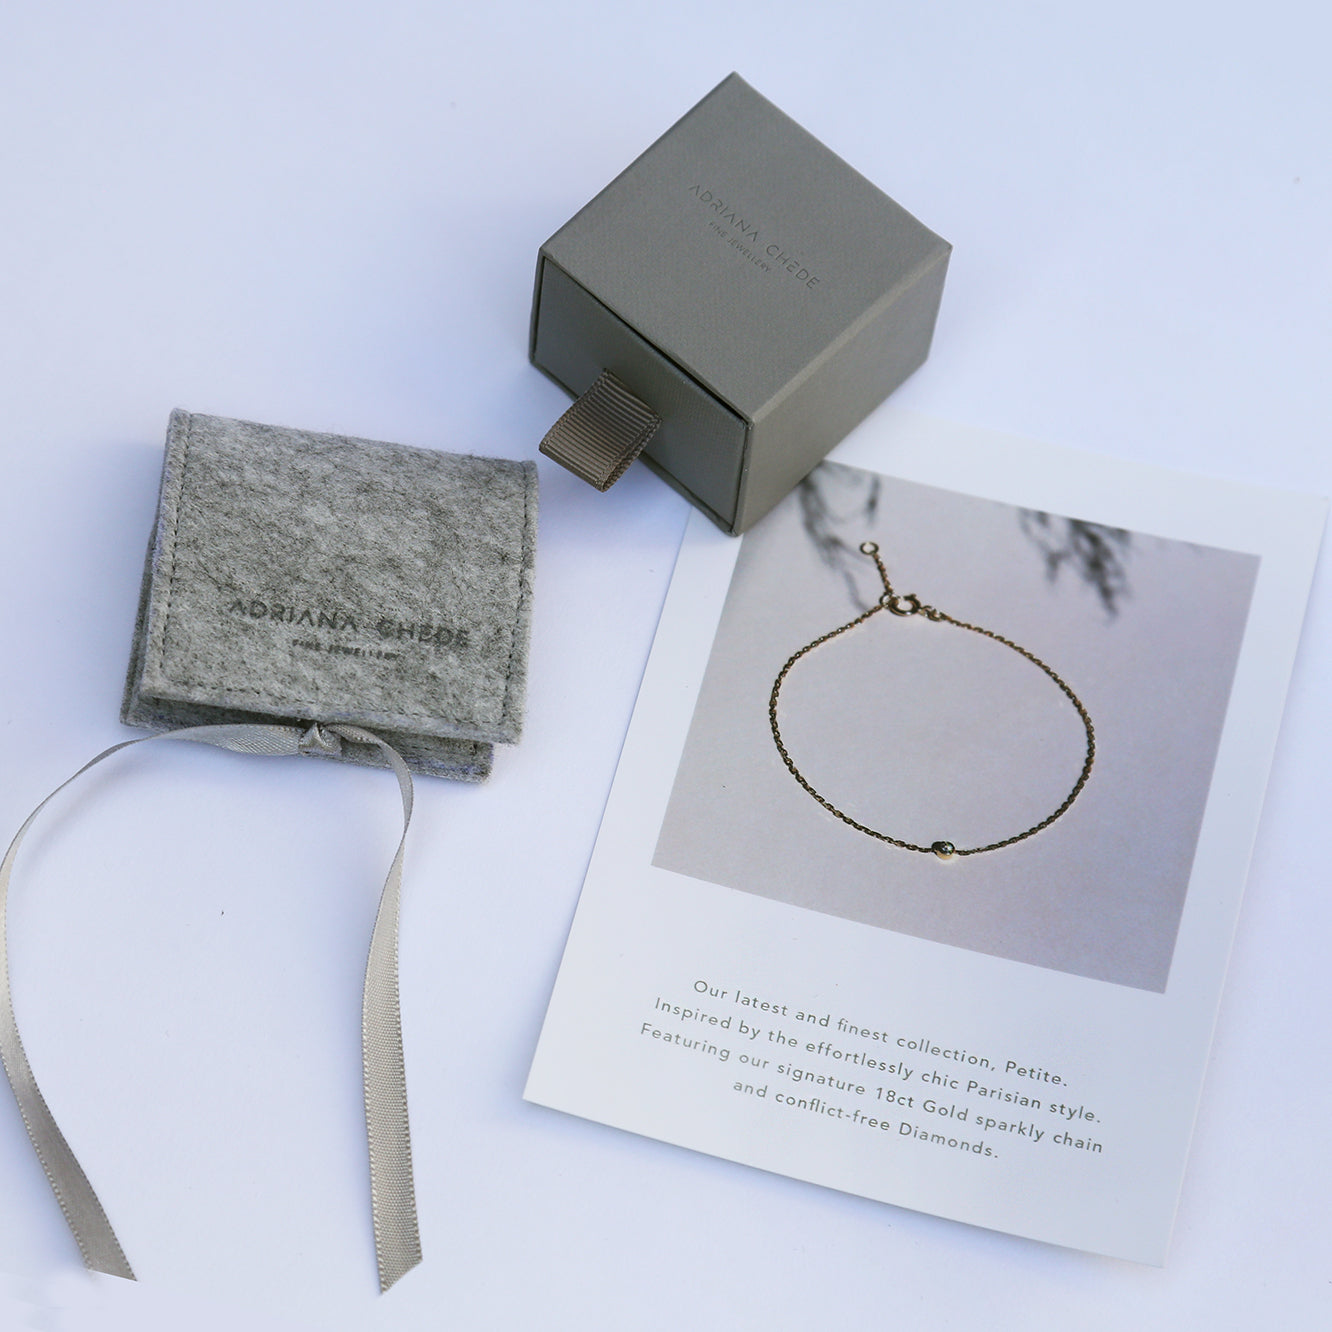 Sustainable packaging London Adriana Chede Jewellery